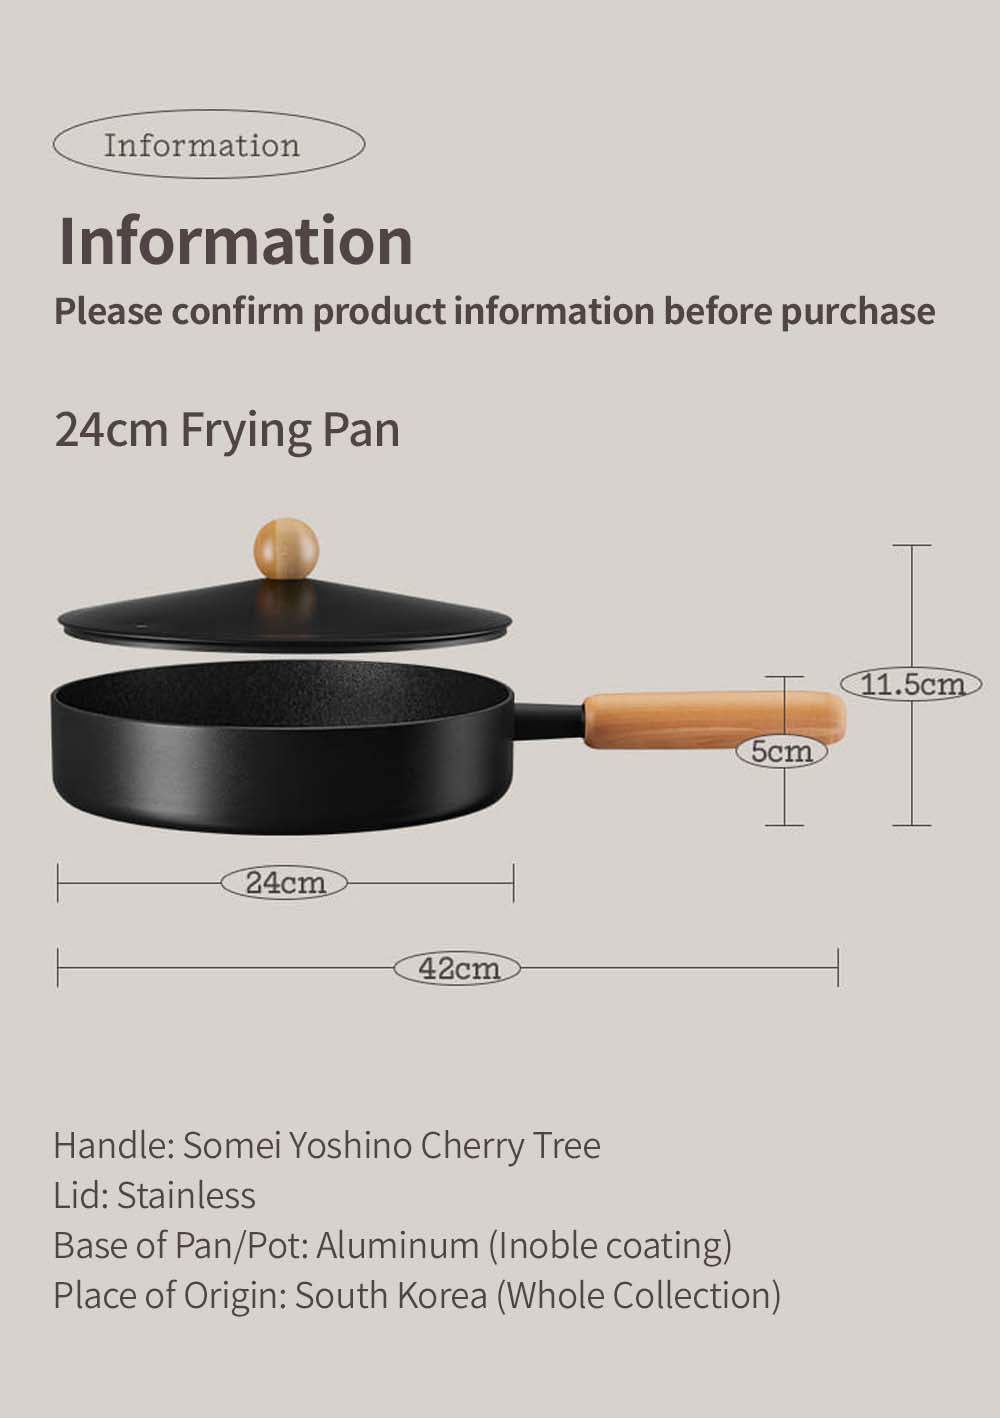 Modori Goodle Collection 24cm frying pan, you can additionally purchase the 24cm frying pan lid that is specially designed to match this frying pan if needed. The wider surface is designed to cook just about anything without worrying about ingredients slipping out of the pan, from frying fish and pasta to cooking steak, it's just perfect for everyday use. The Modori Goodle Collection is a brand new collection with clean lining and neat design, a black body and a wooden handle for a warm and contemporary feel, combines all the advantages of coated cookware, stainless steel cookware, and cast iron cookware, ideal for long-term durability performance. In this collection, we used a special Inoble coating patented oil method that enhances the non-stick effects and makes it easier to clean after use and requires minimal maintenance. It has the same heat retention effect as cast iron and is suitable for cooking with various stoves, such as gas stoves, induction cookers (except ferromagnetic induction cookers), ceramic cookers, and heating plates.